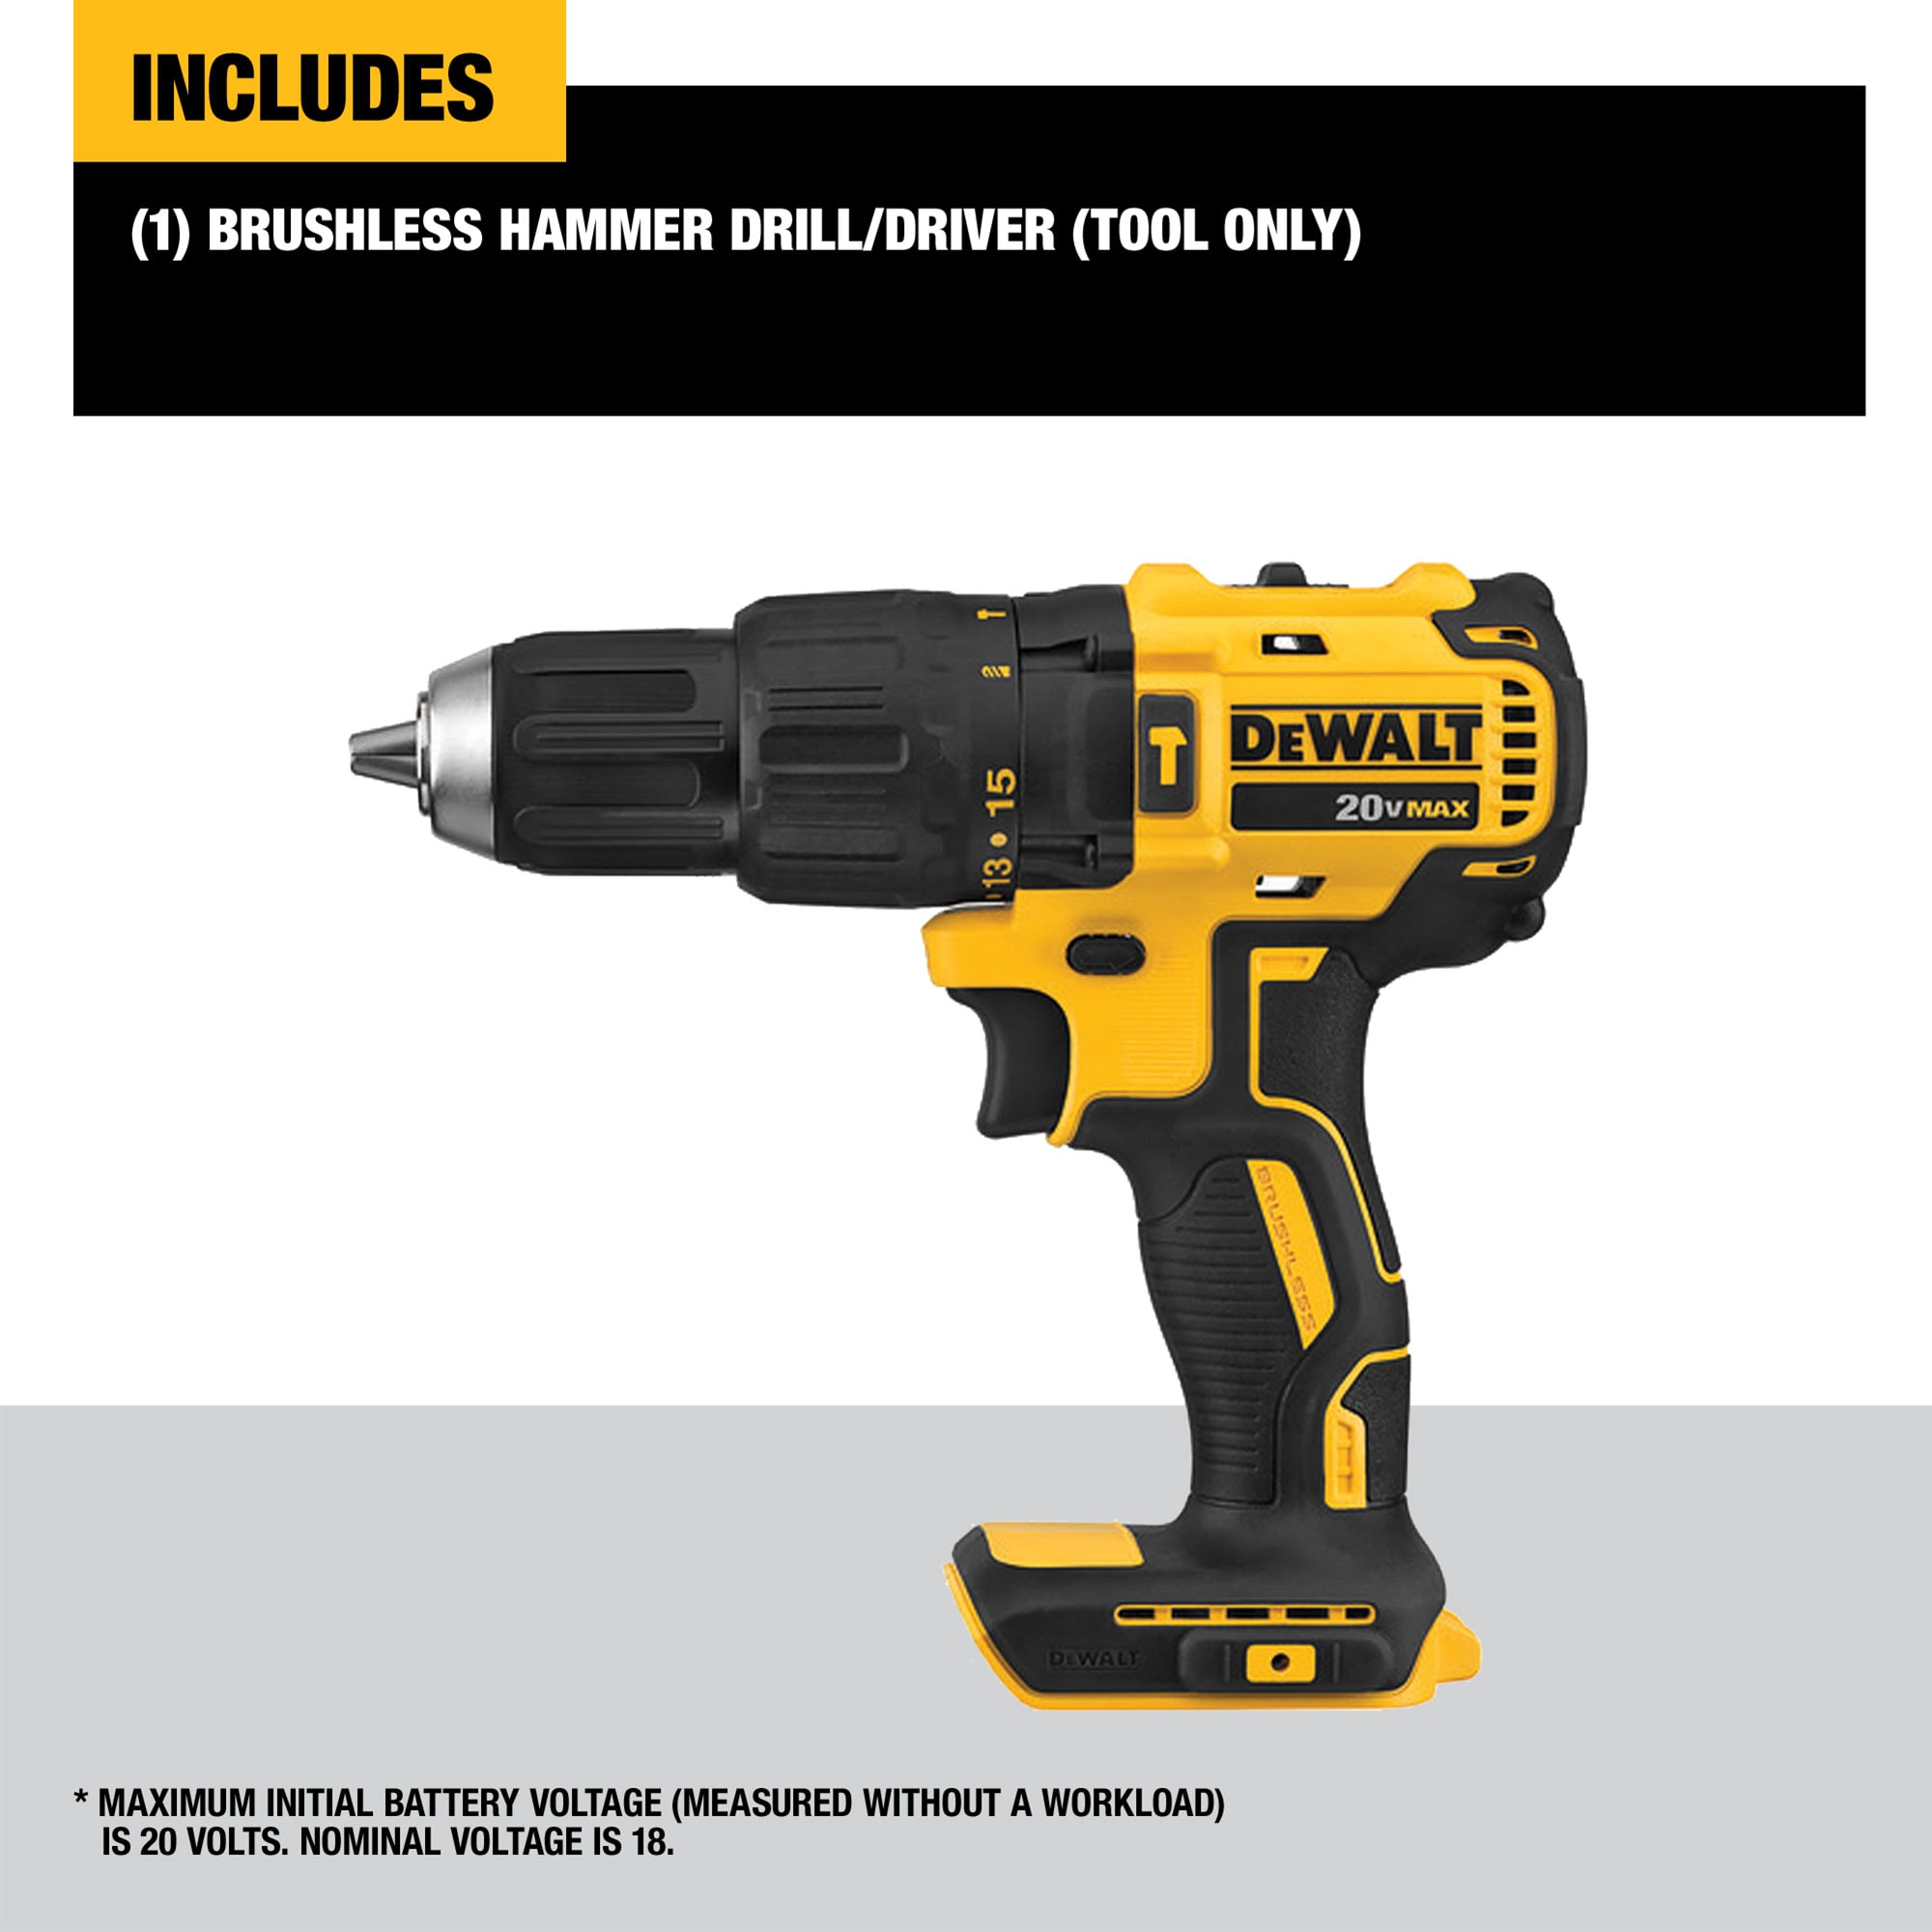 Beyond By 20V Max Cordless Drill/Driver